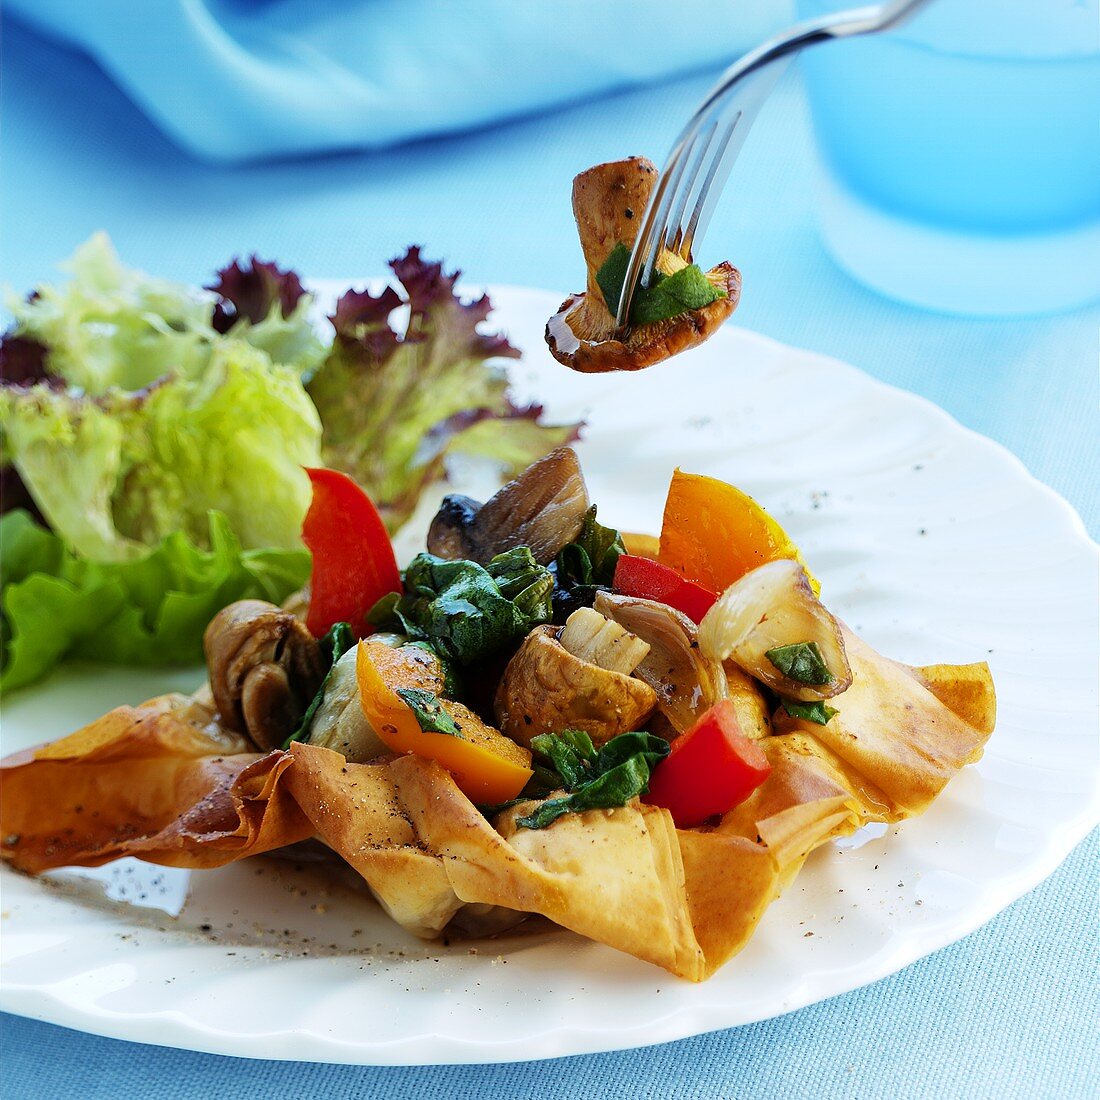 Mushrooms with vegetables in filo pastry